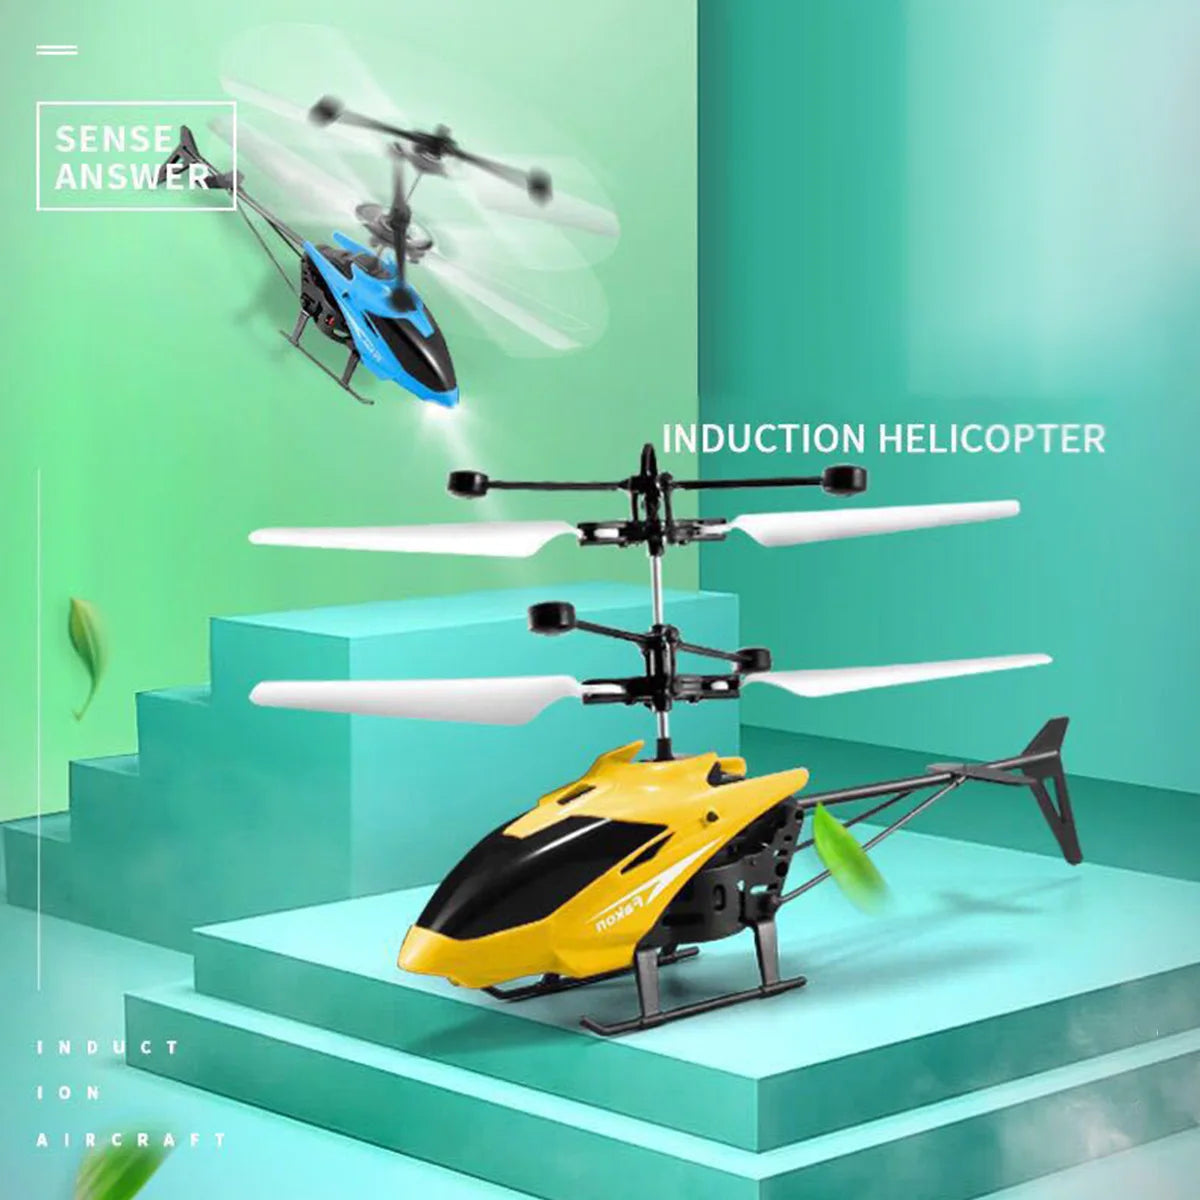 CY-38 Rc Helicopter, the flying ball will automatically sense the objects underneath and fly away to ensure safety . when the